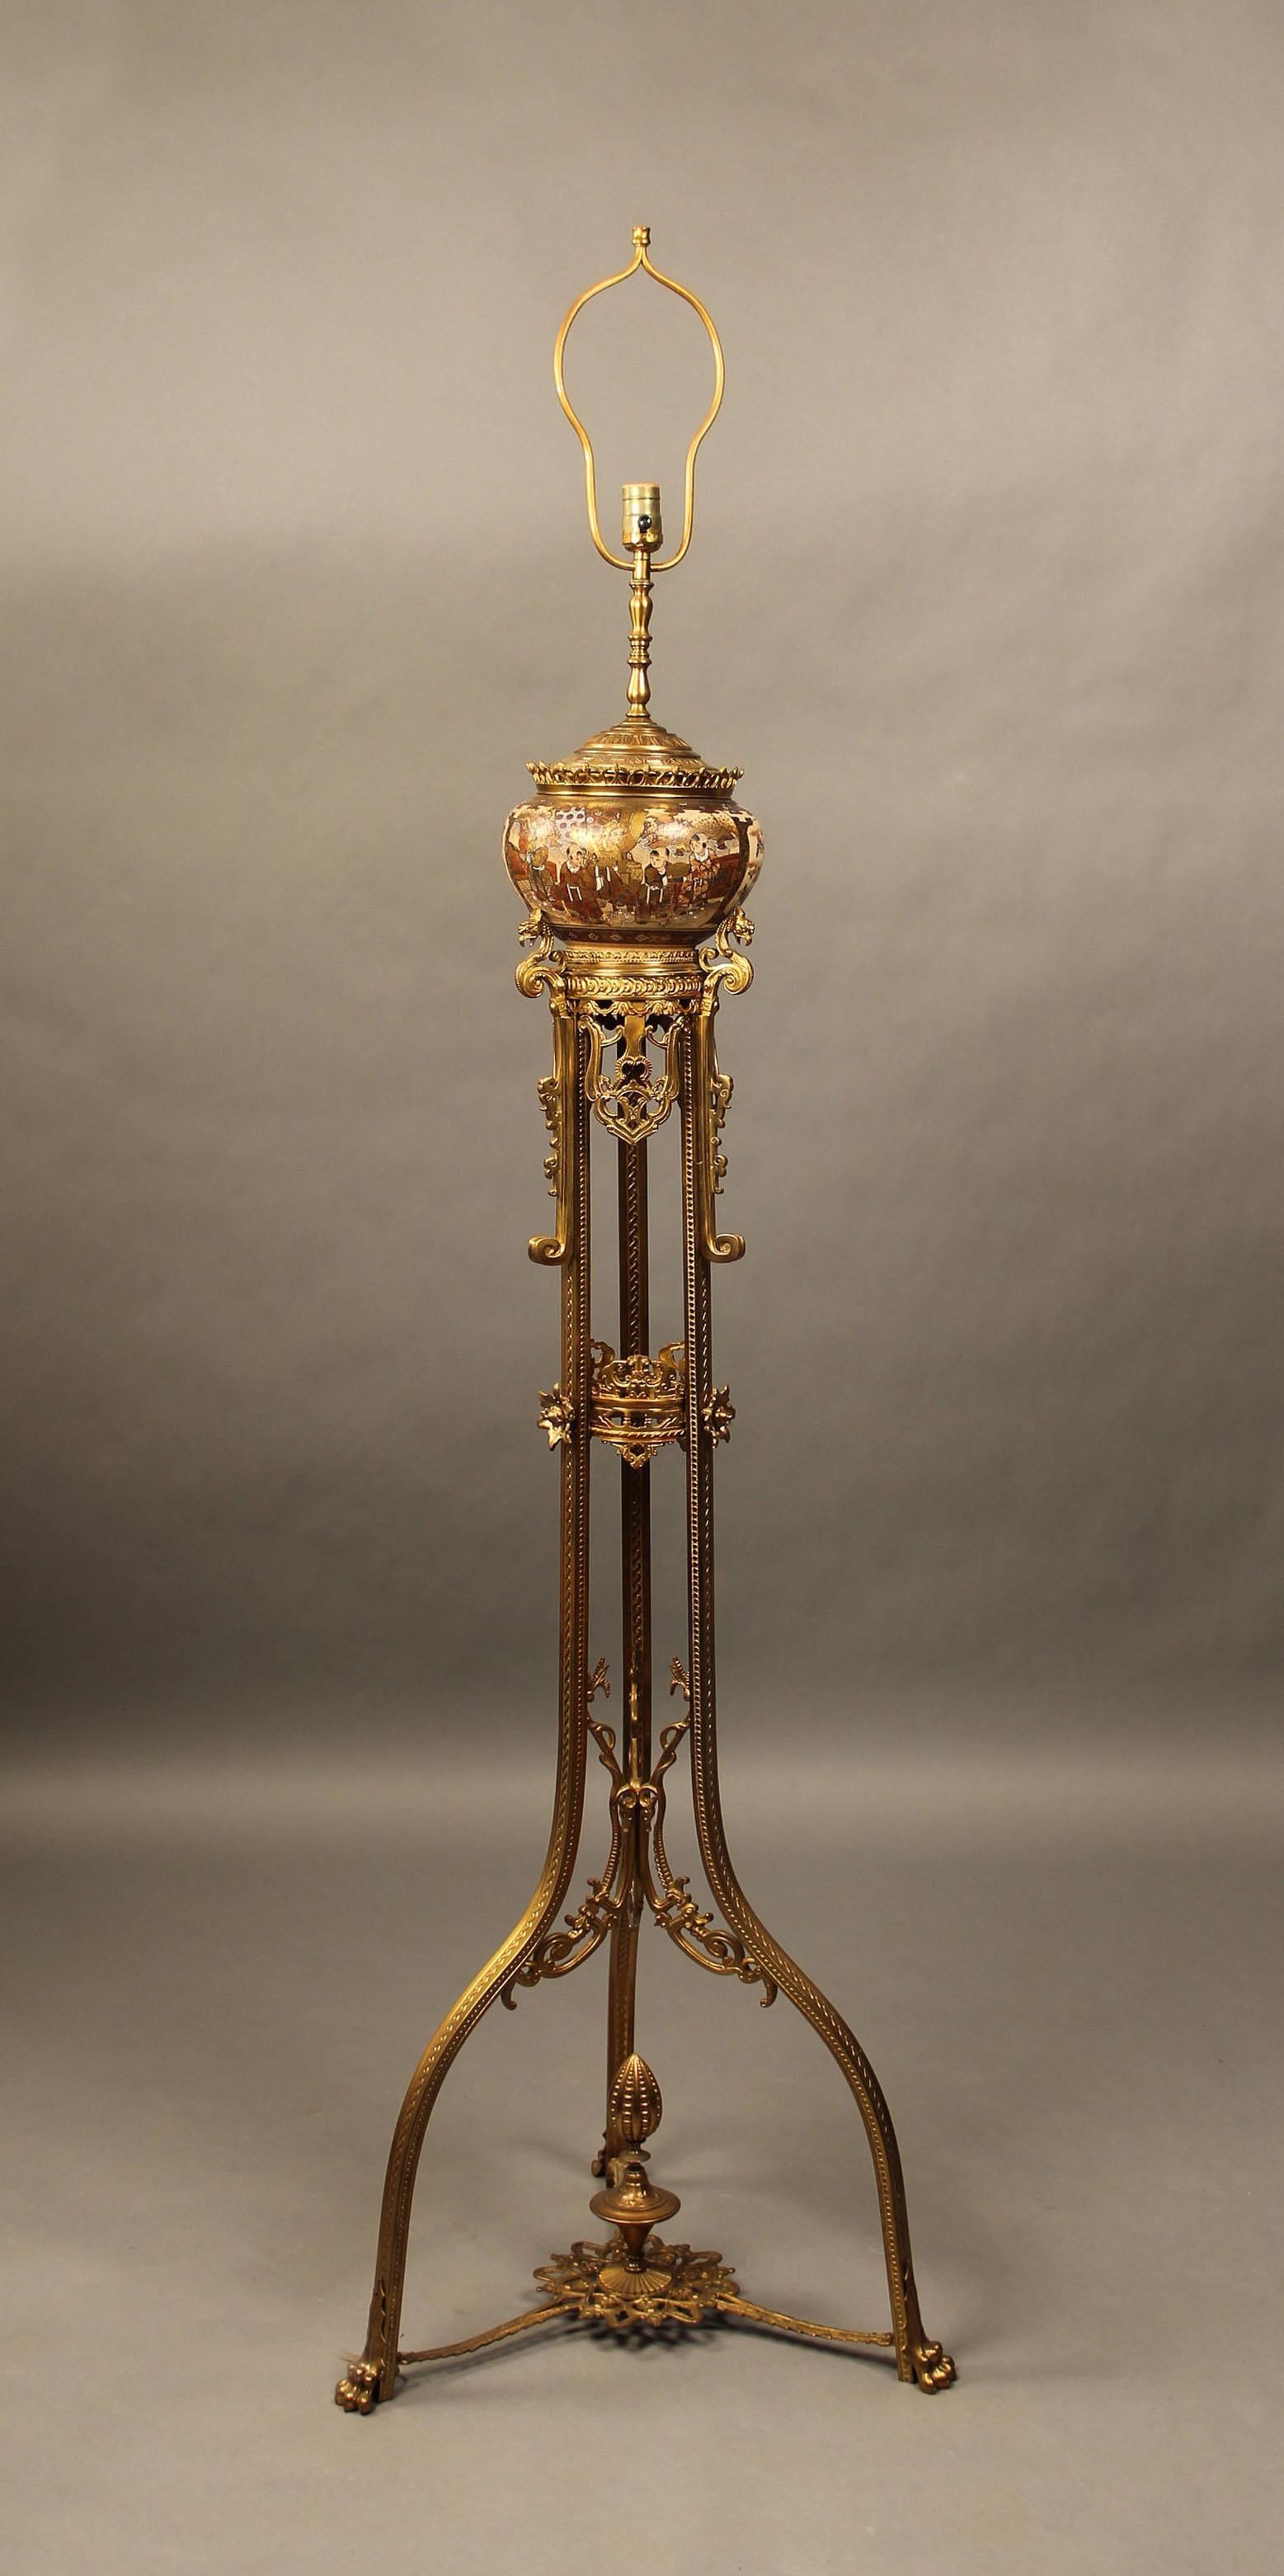 Late 19th Century Gilt Bronze and Japanese Satsuma Porcelain Floor Lamp

The round lamp with painted scenes of men, women and children in landscape scenes and at leisure surrounded by very fine raised gold designs, sitting on a nicely designed